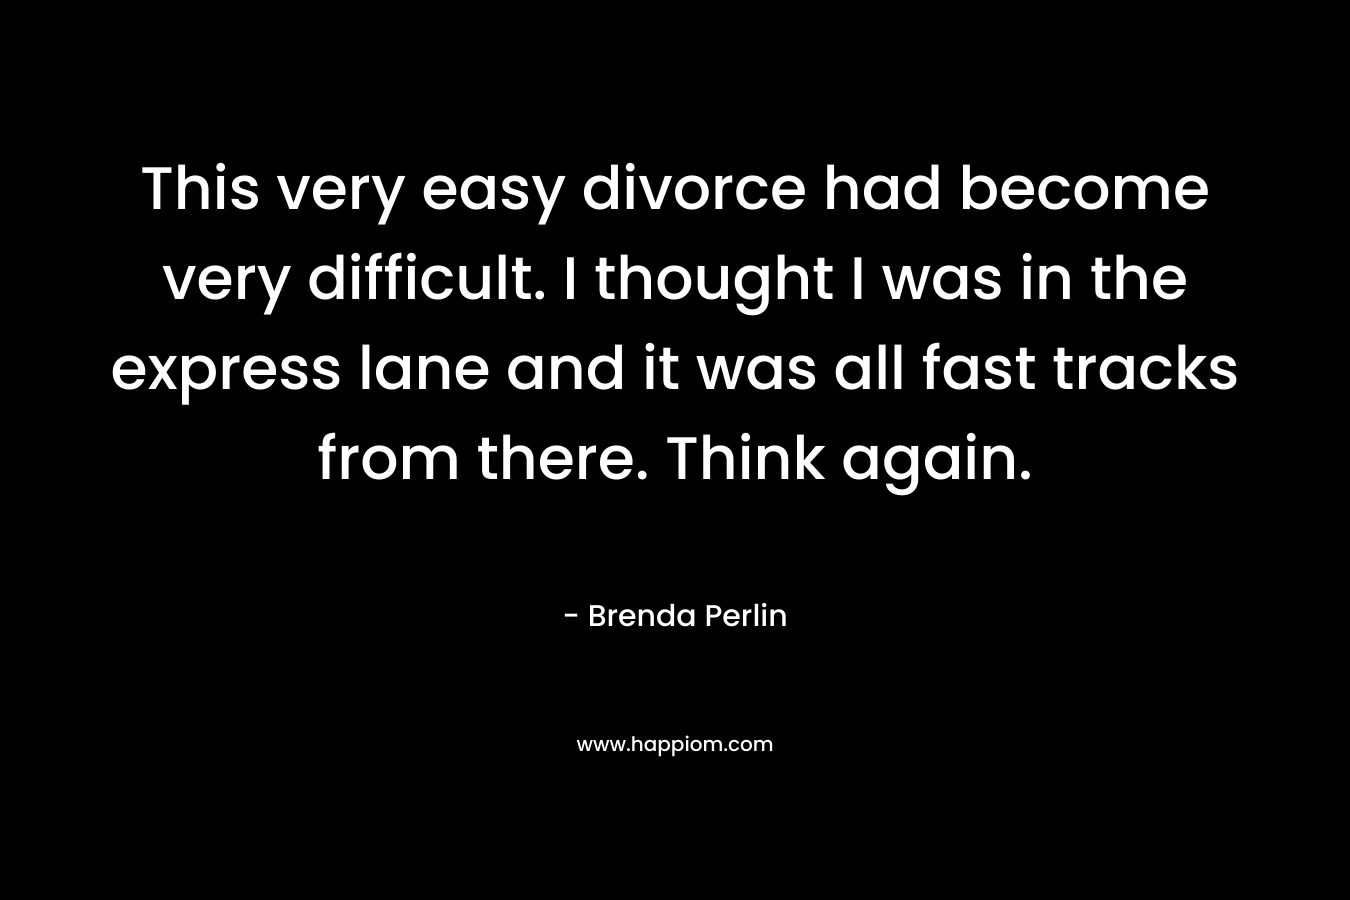 This very easy divorce had become very difficult. I thought I was in the express lane and it was all fast tracks from there. Think again. – Brenda Perlin